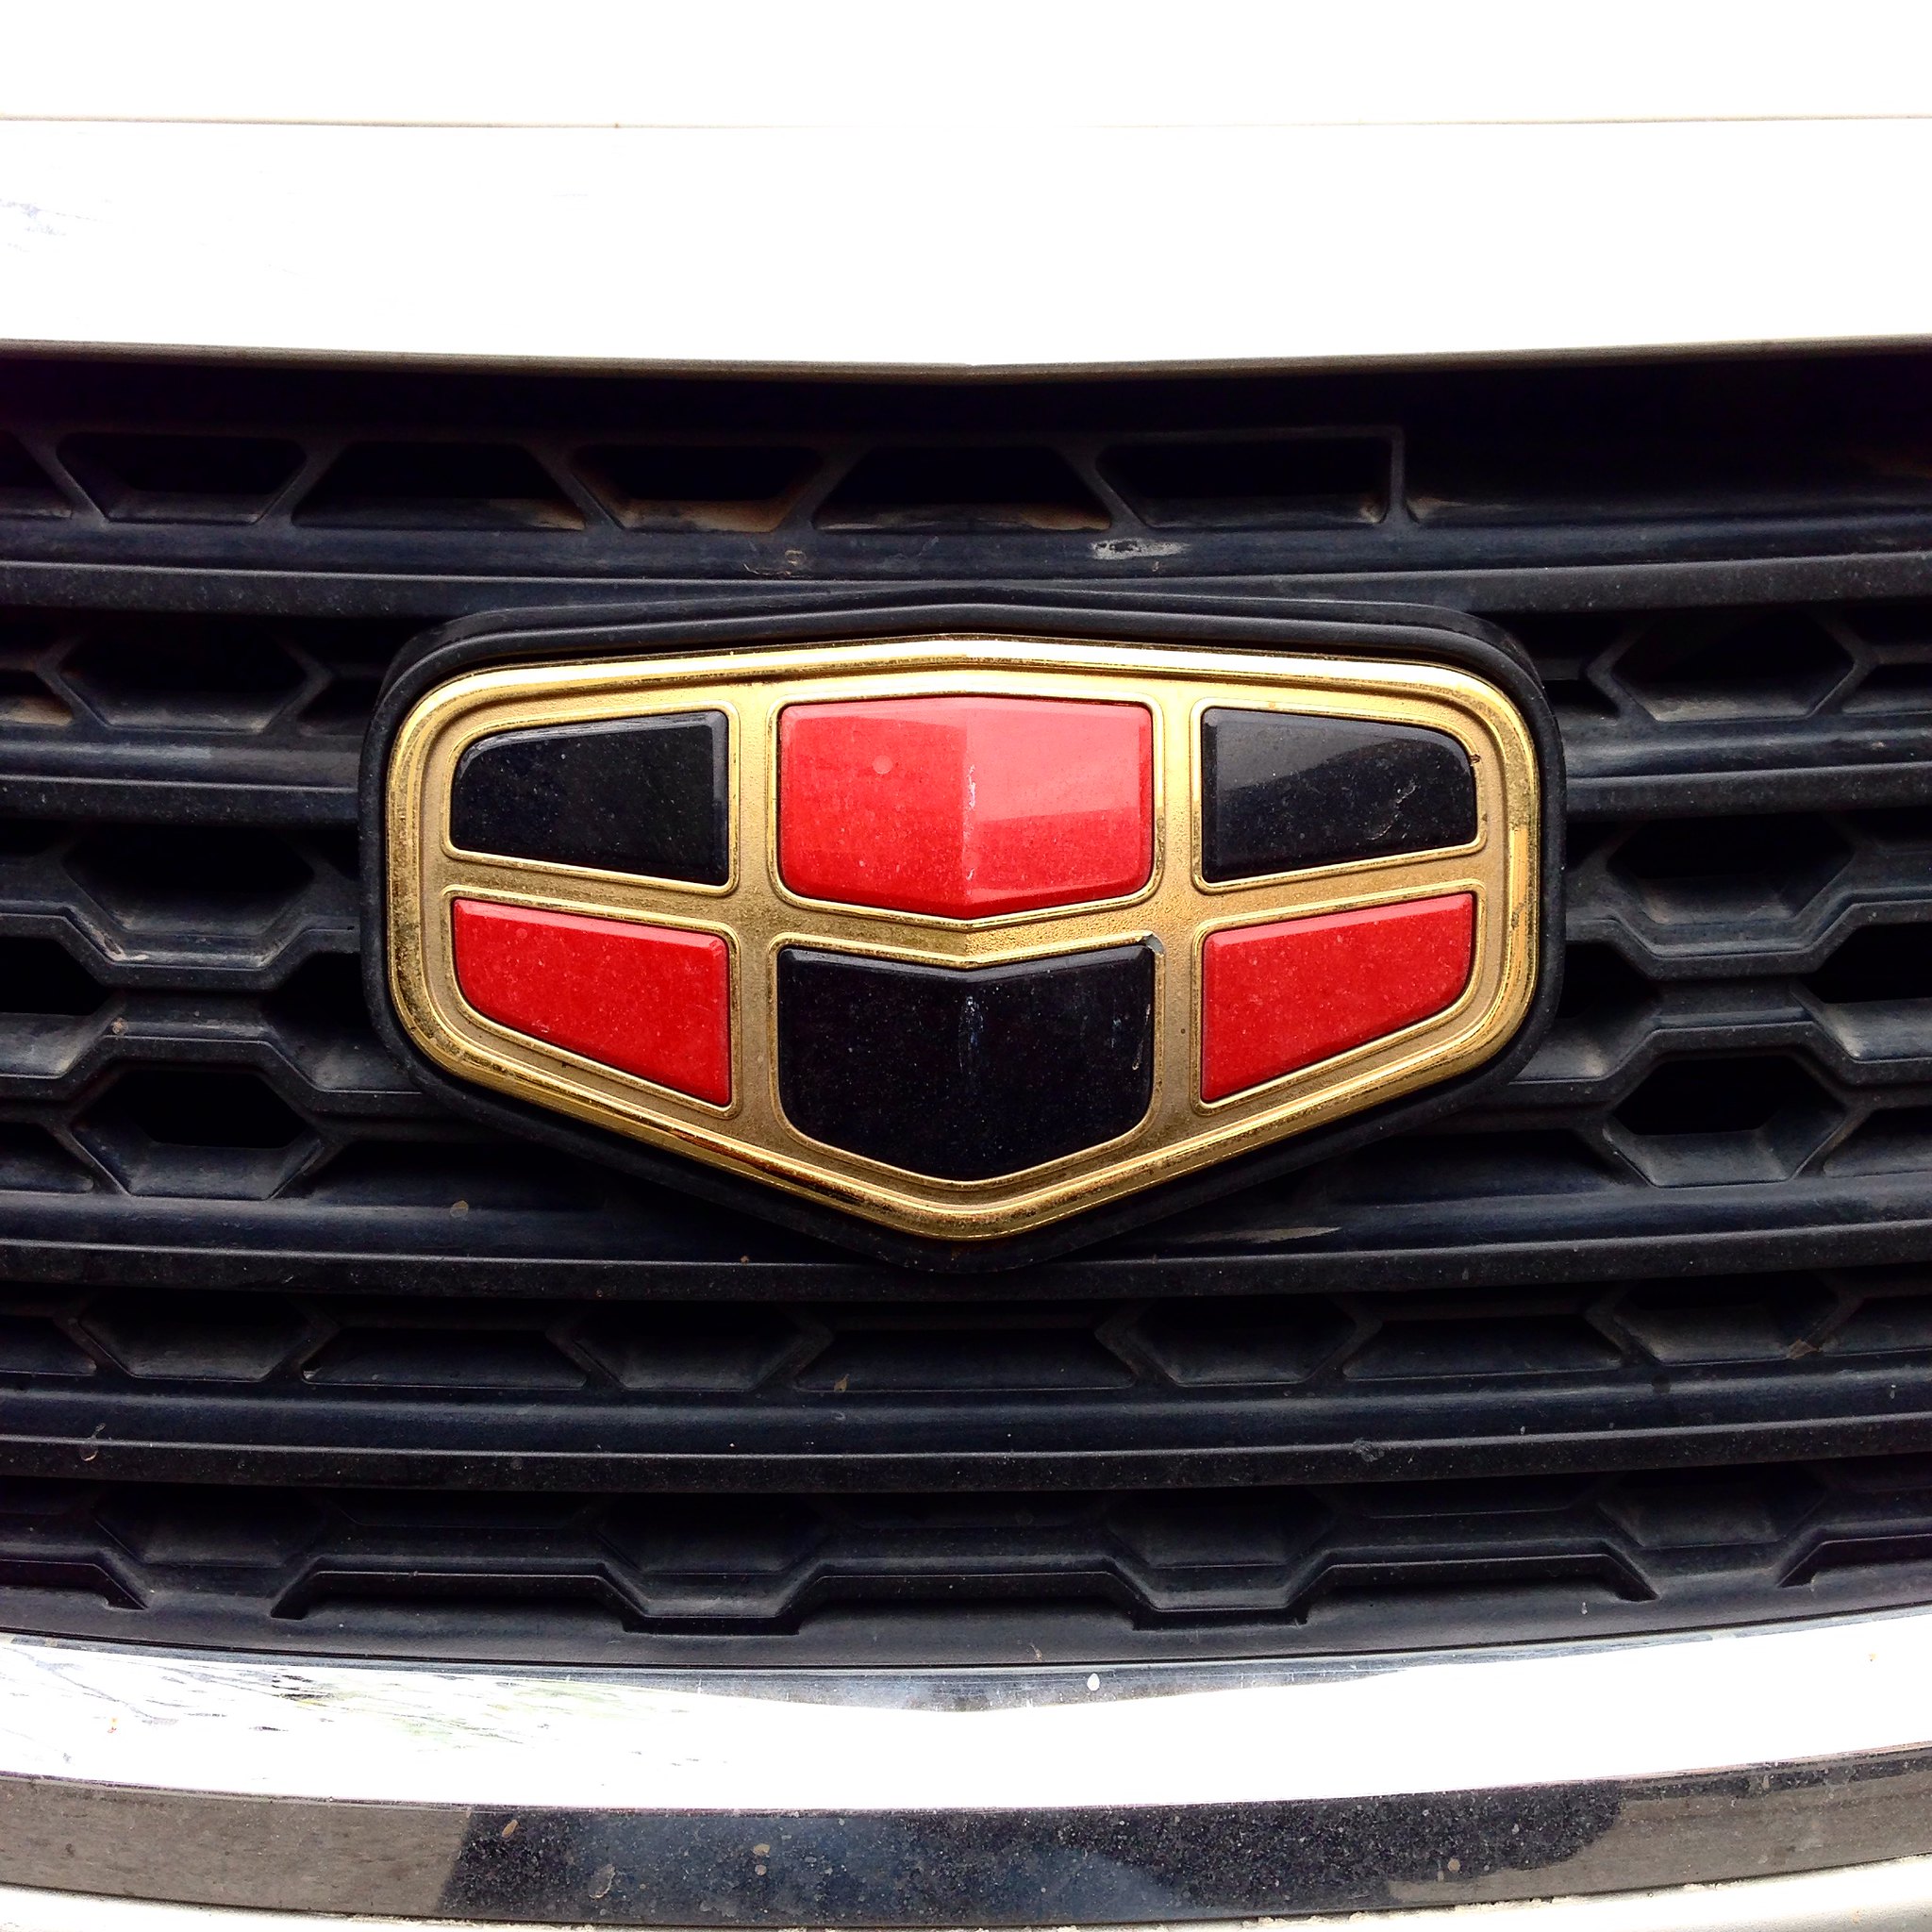 Emgrand - Geely badges (Chile)